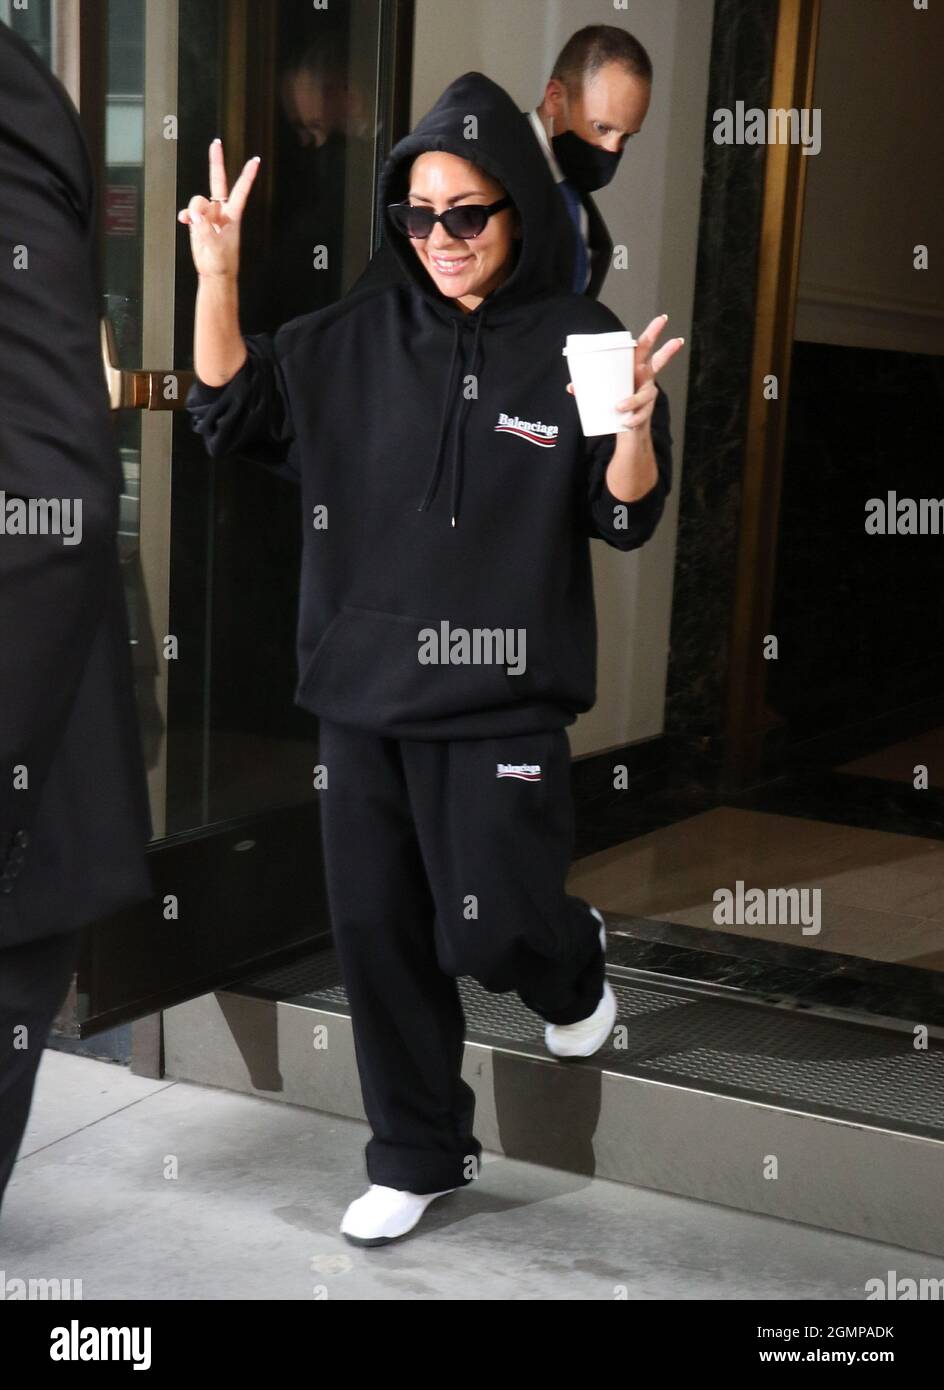 New York - NY - 20210803 Lady Gaga leaves her hotel in a Balenciaga track  suit heading for Radio City. -PICTURED: Lady Gaga ROGER WONG Stock Photo -  Alamy